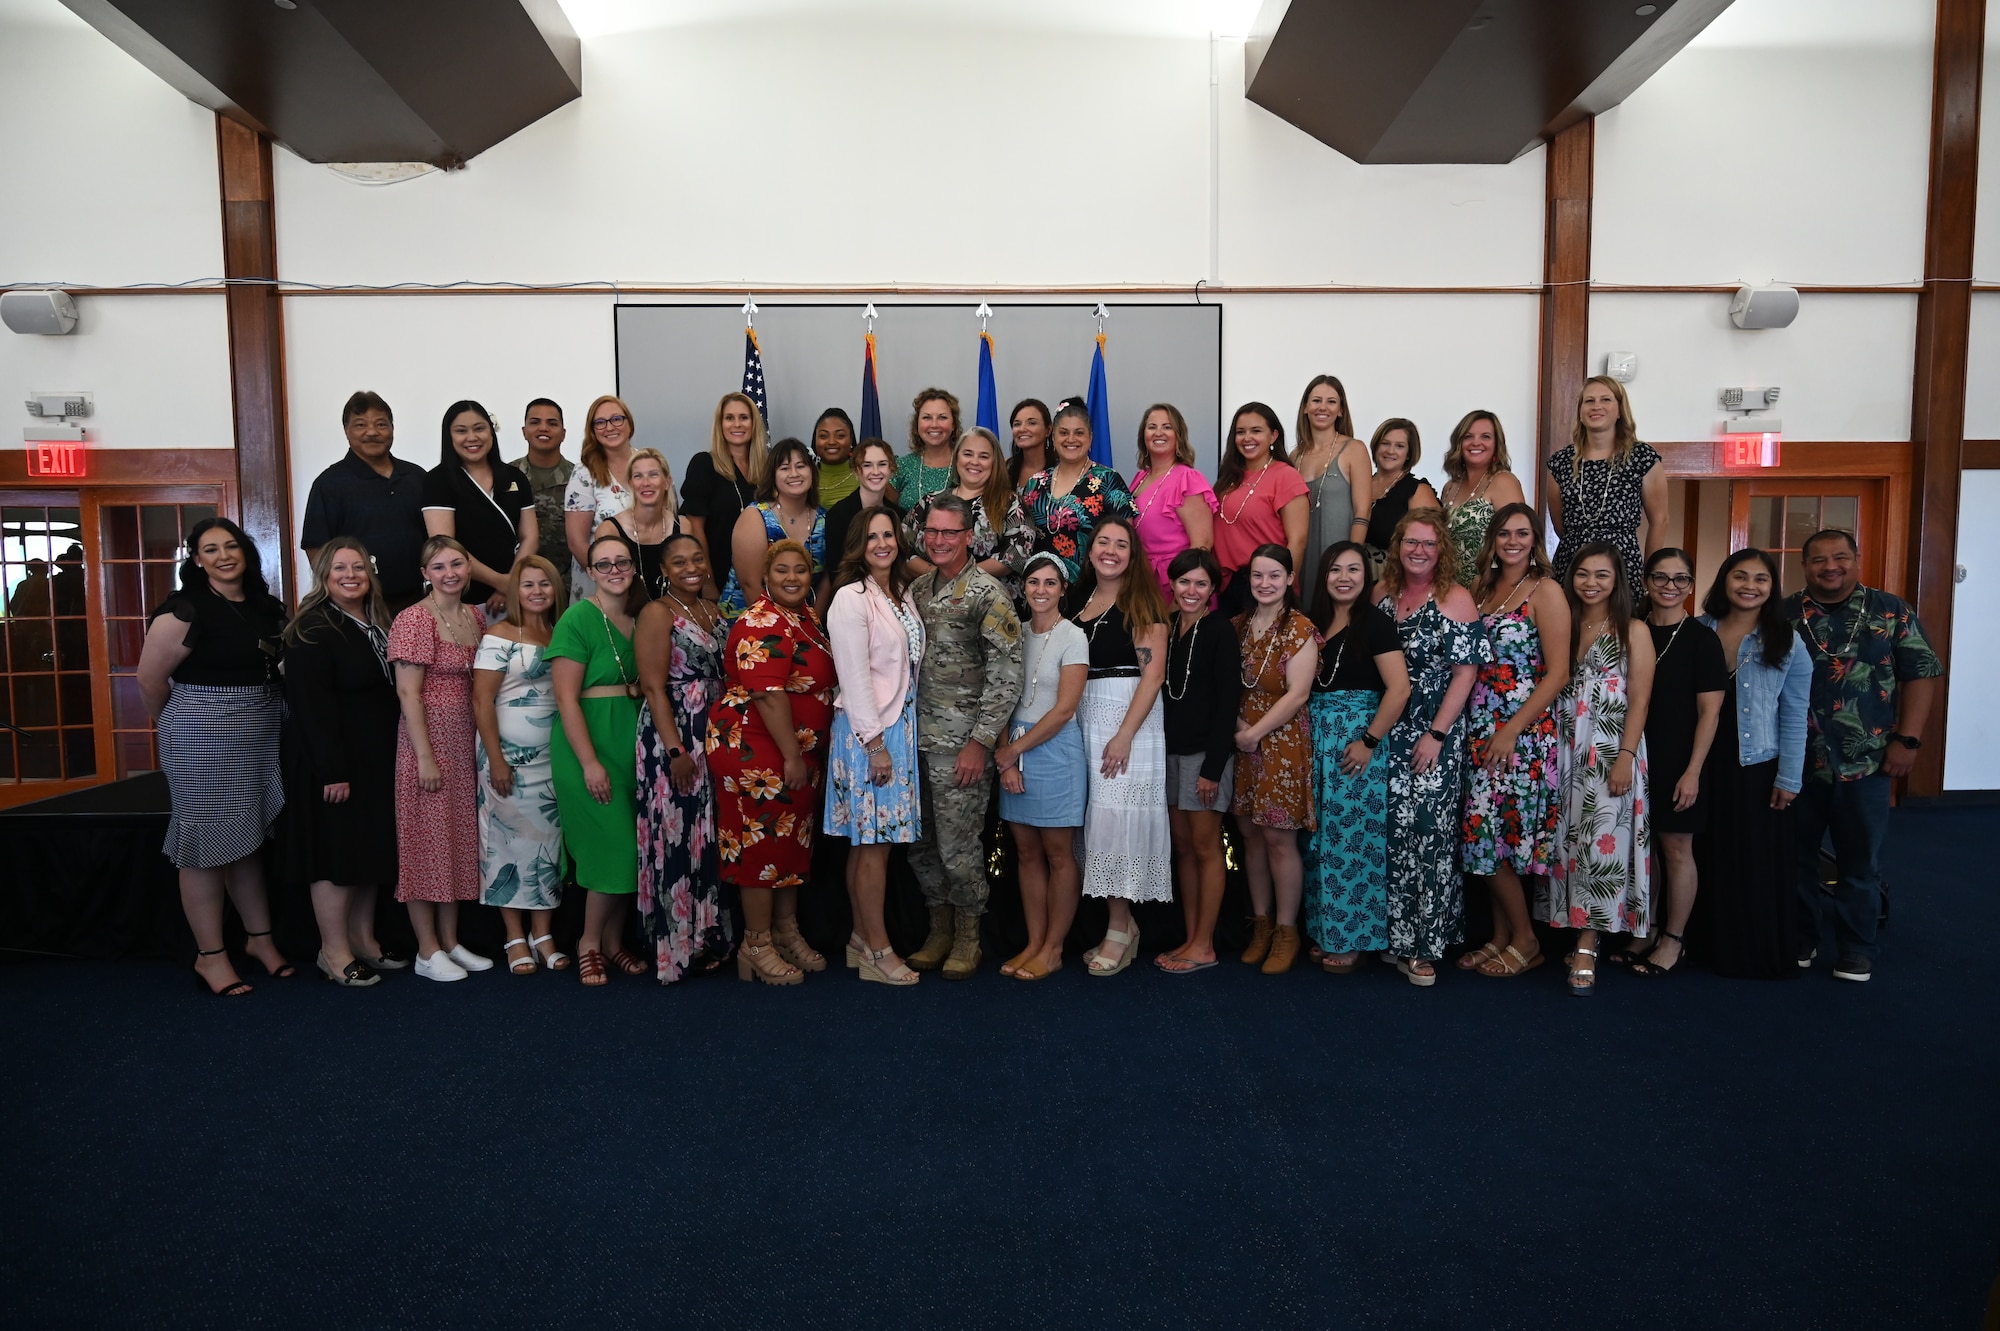 Key Spouse members along with the commander of the 36th Wing pose for a group photo.